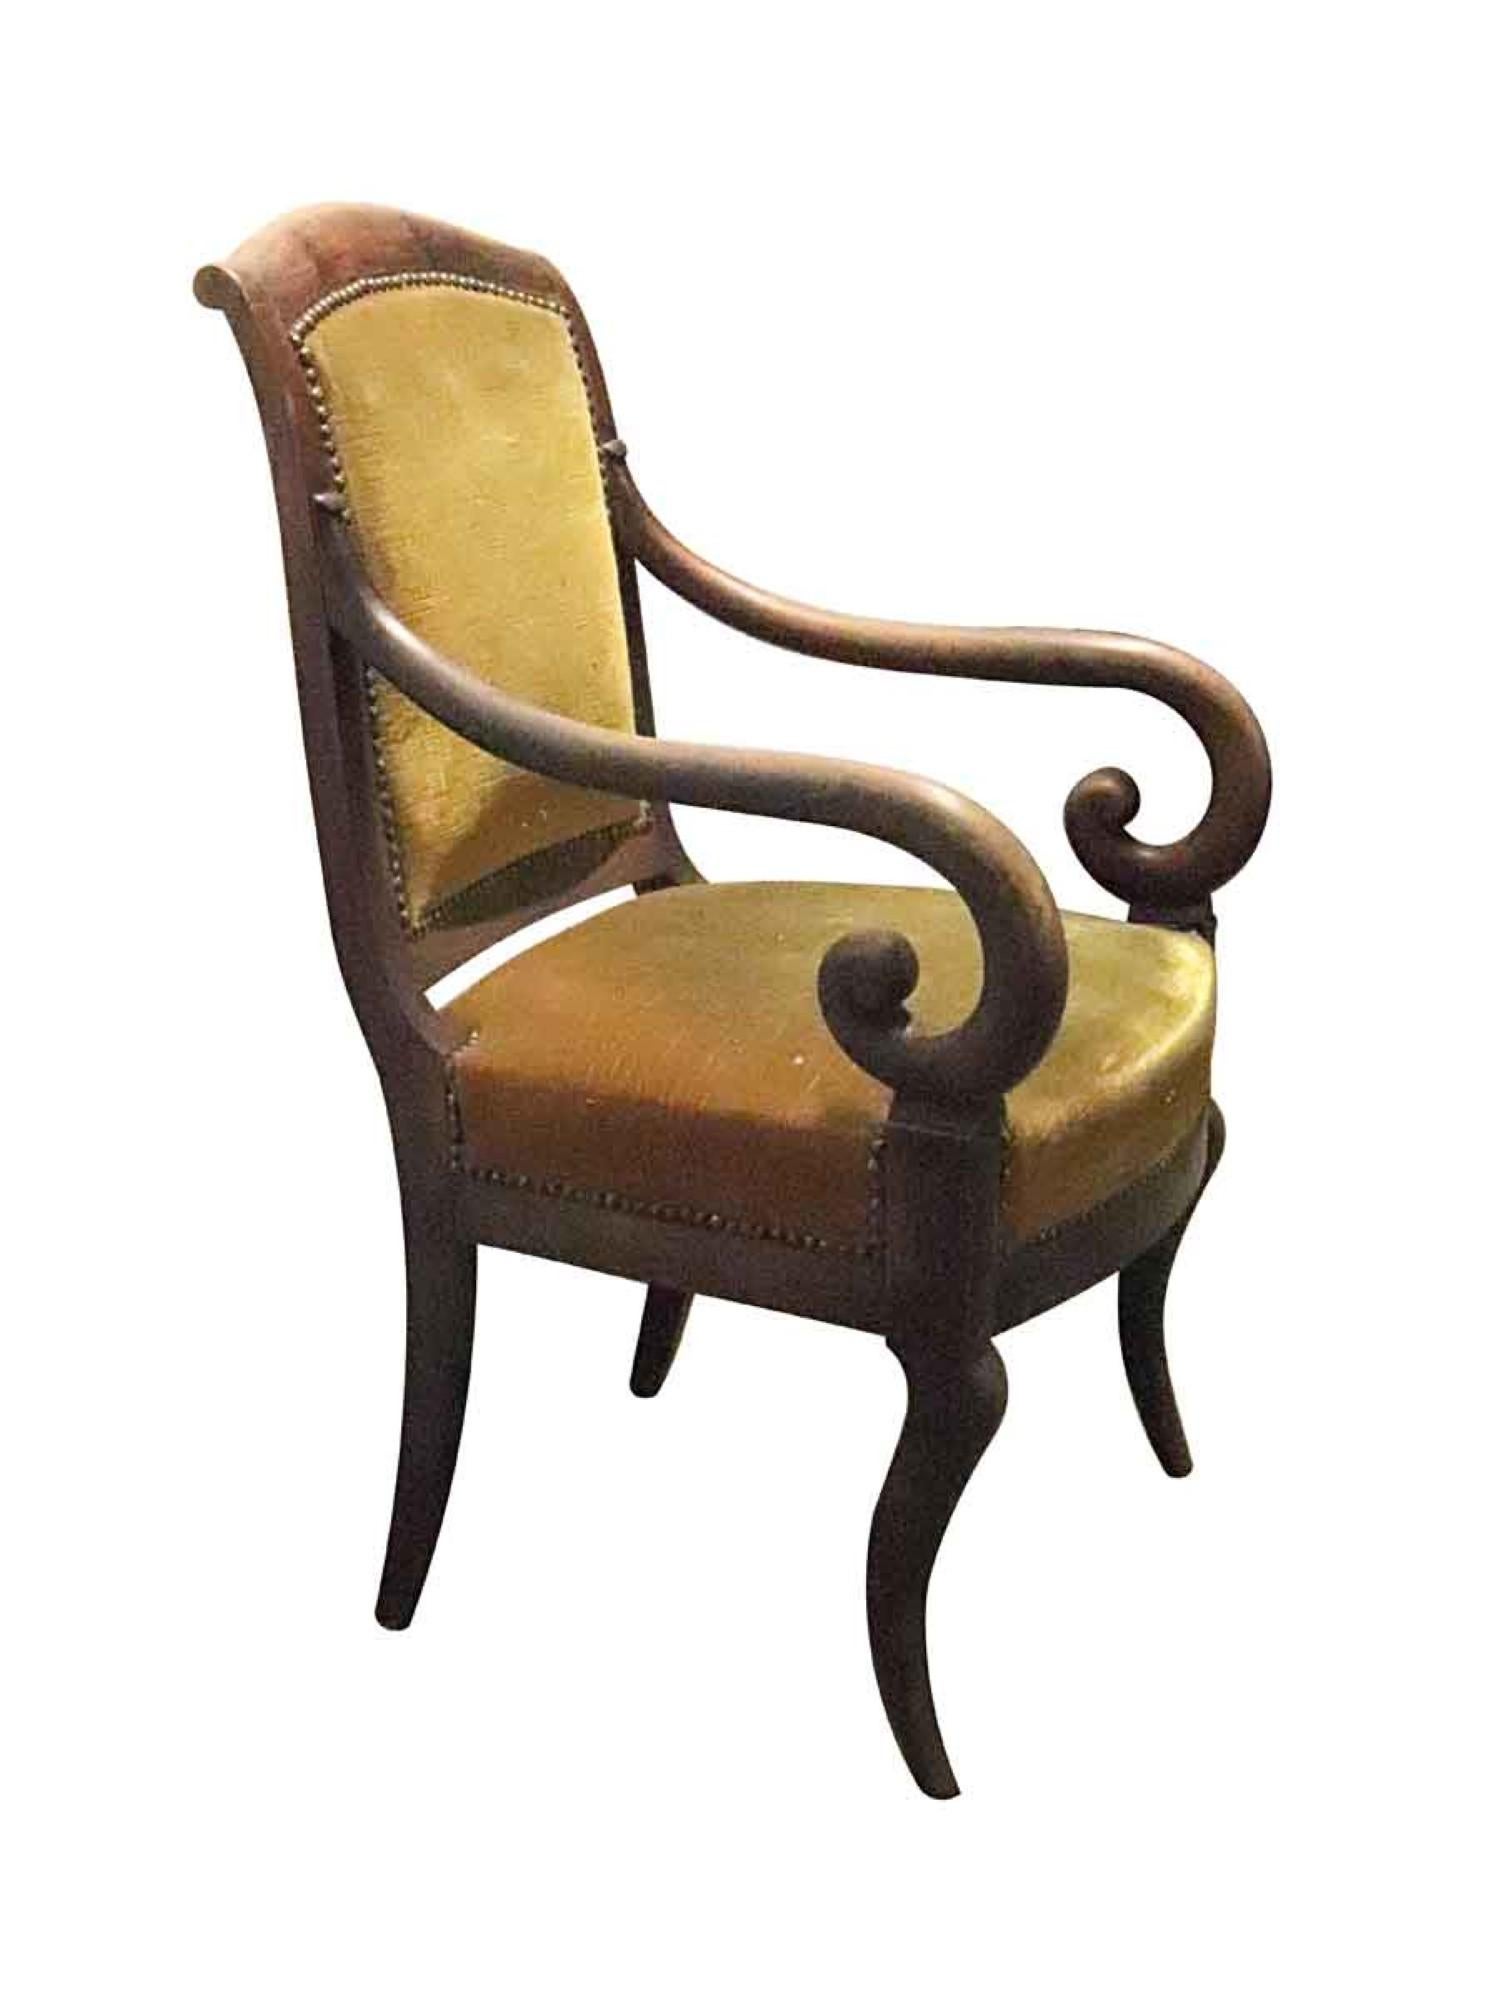 1940s pair of French Empire style armchairs with worn dark yellow upholstery. The frames are strong and in good condition, finish is showing wear also. Priced as a pair. This can be seen at our 333 West 52nd St location in the Theater District West